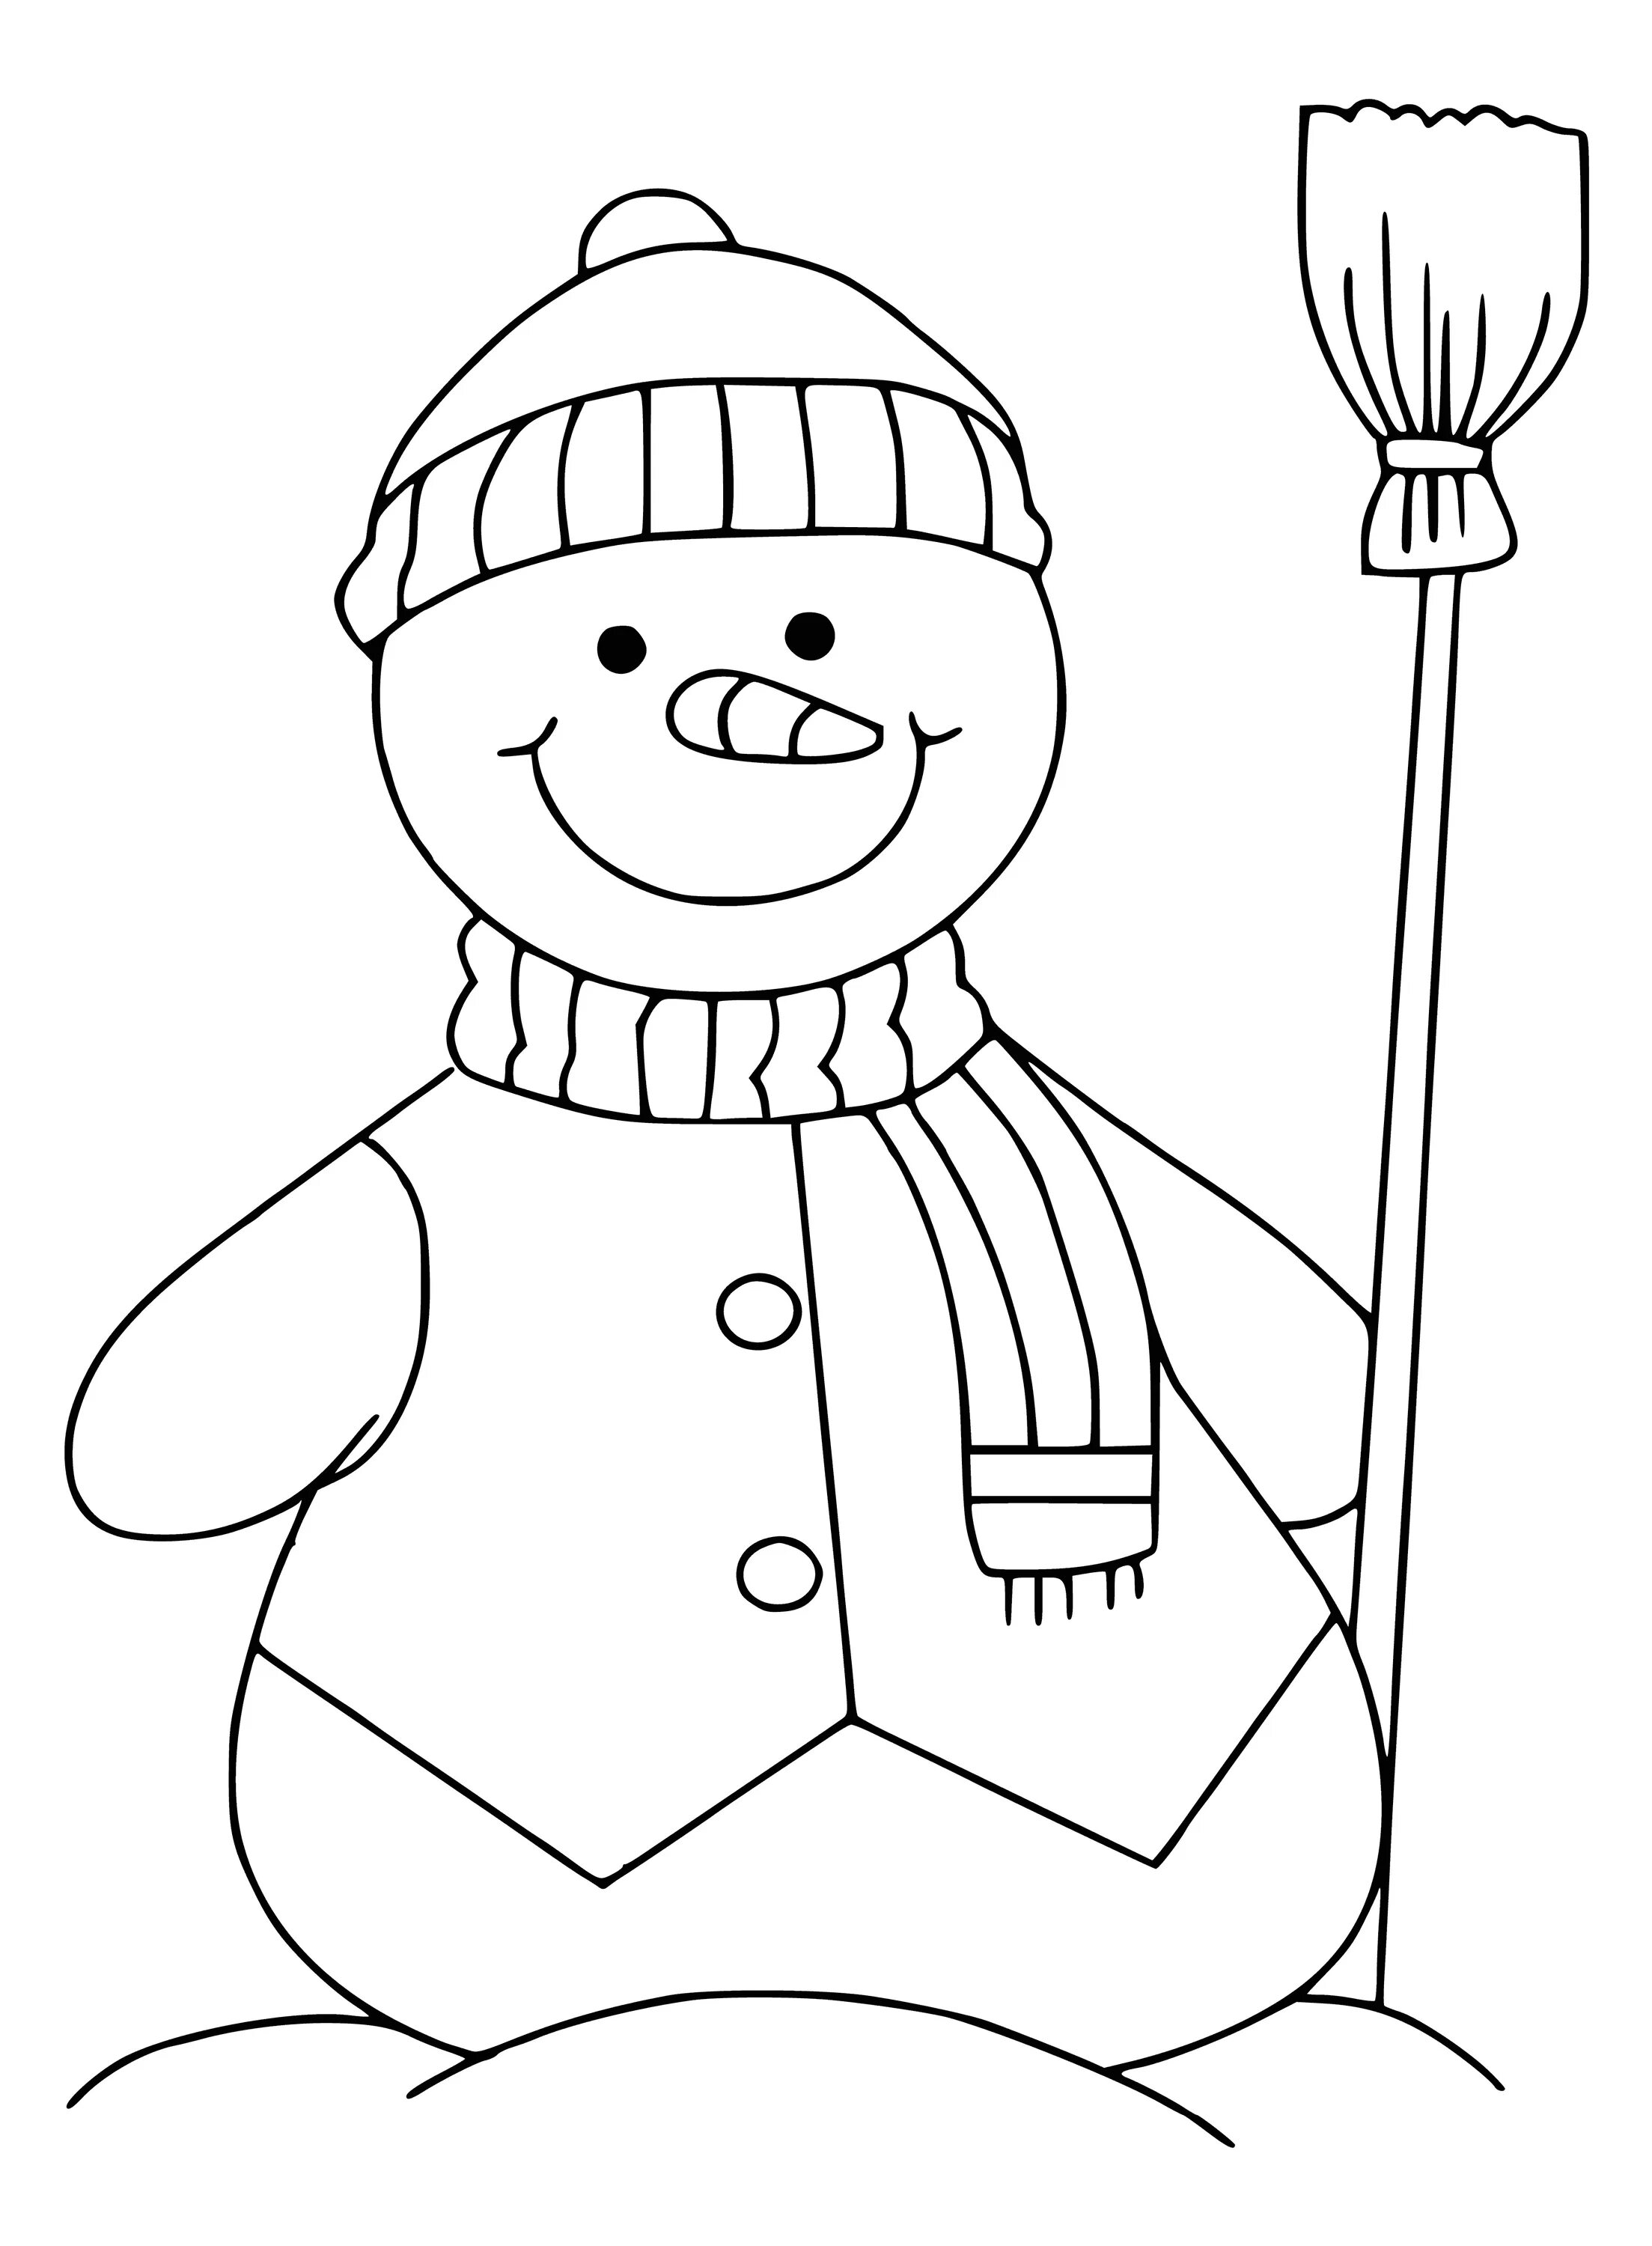 Funny Christmas snowman coloring book